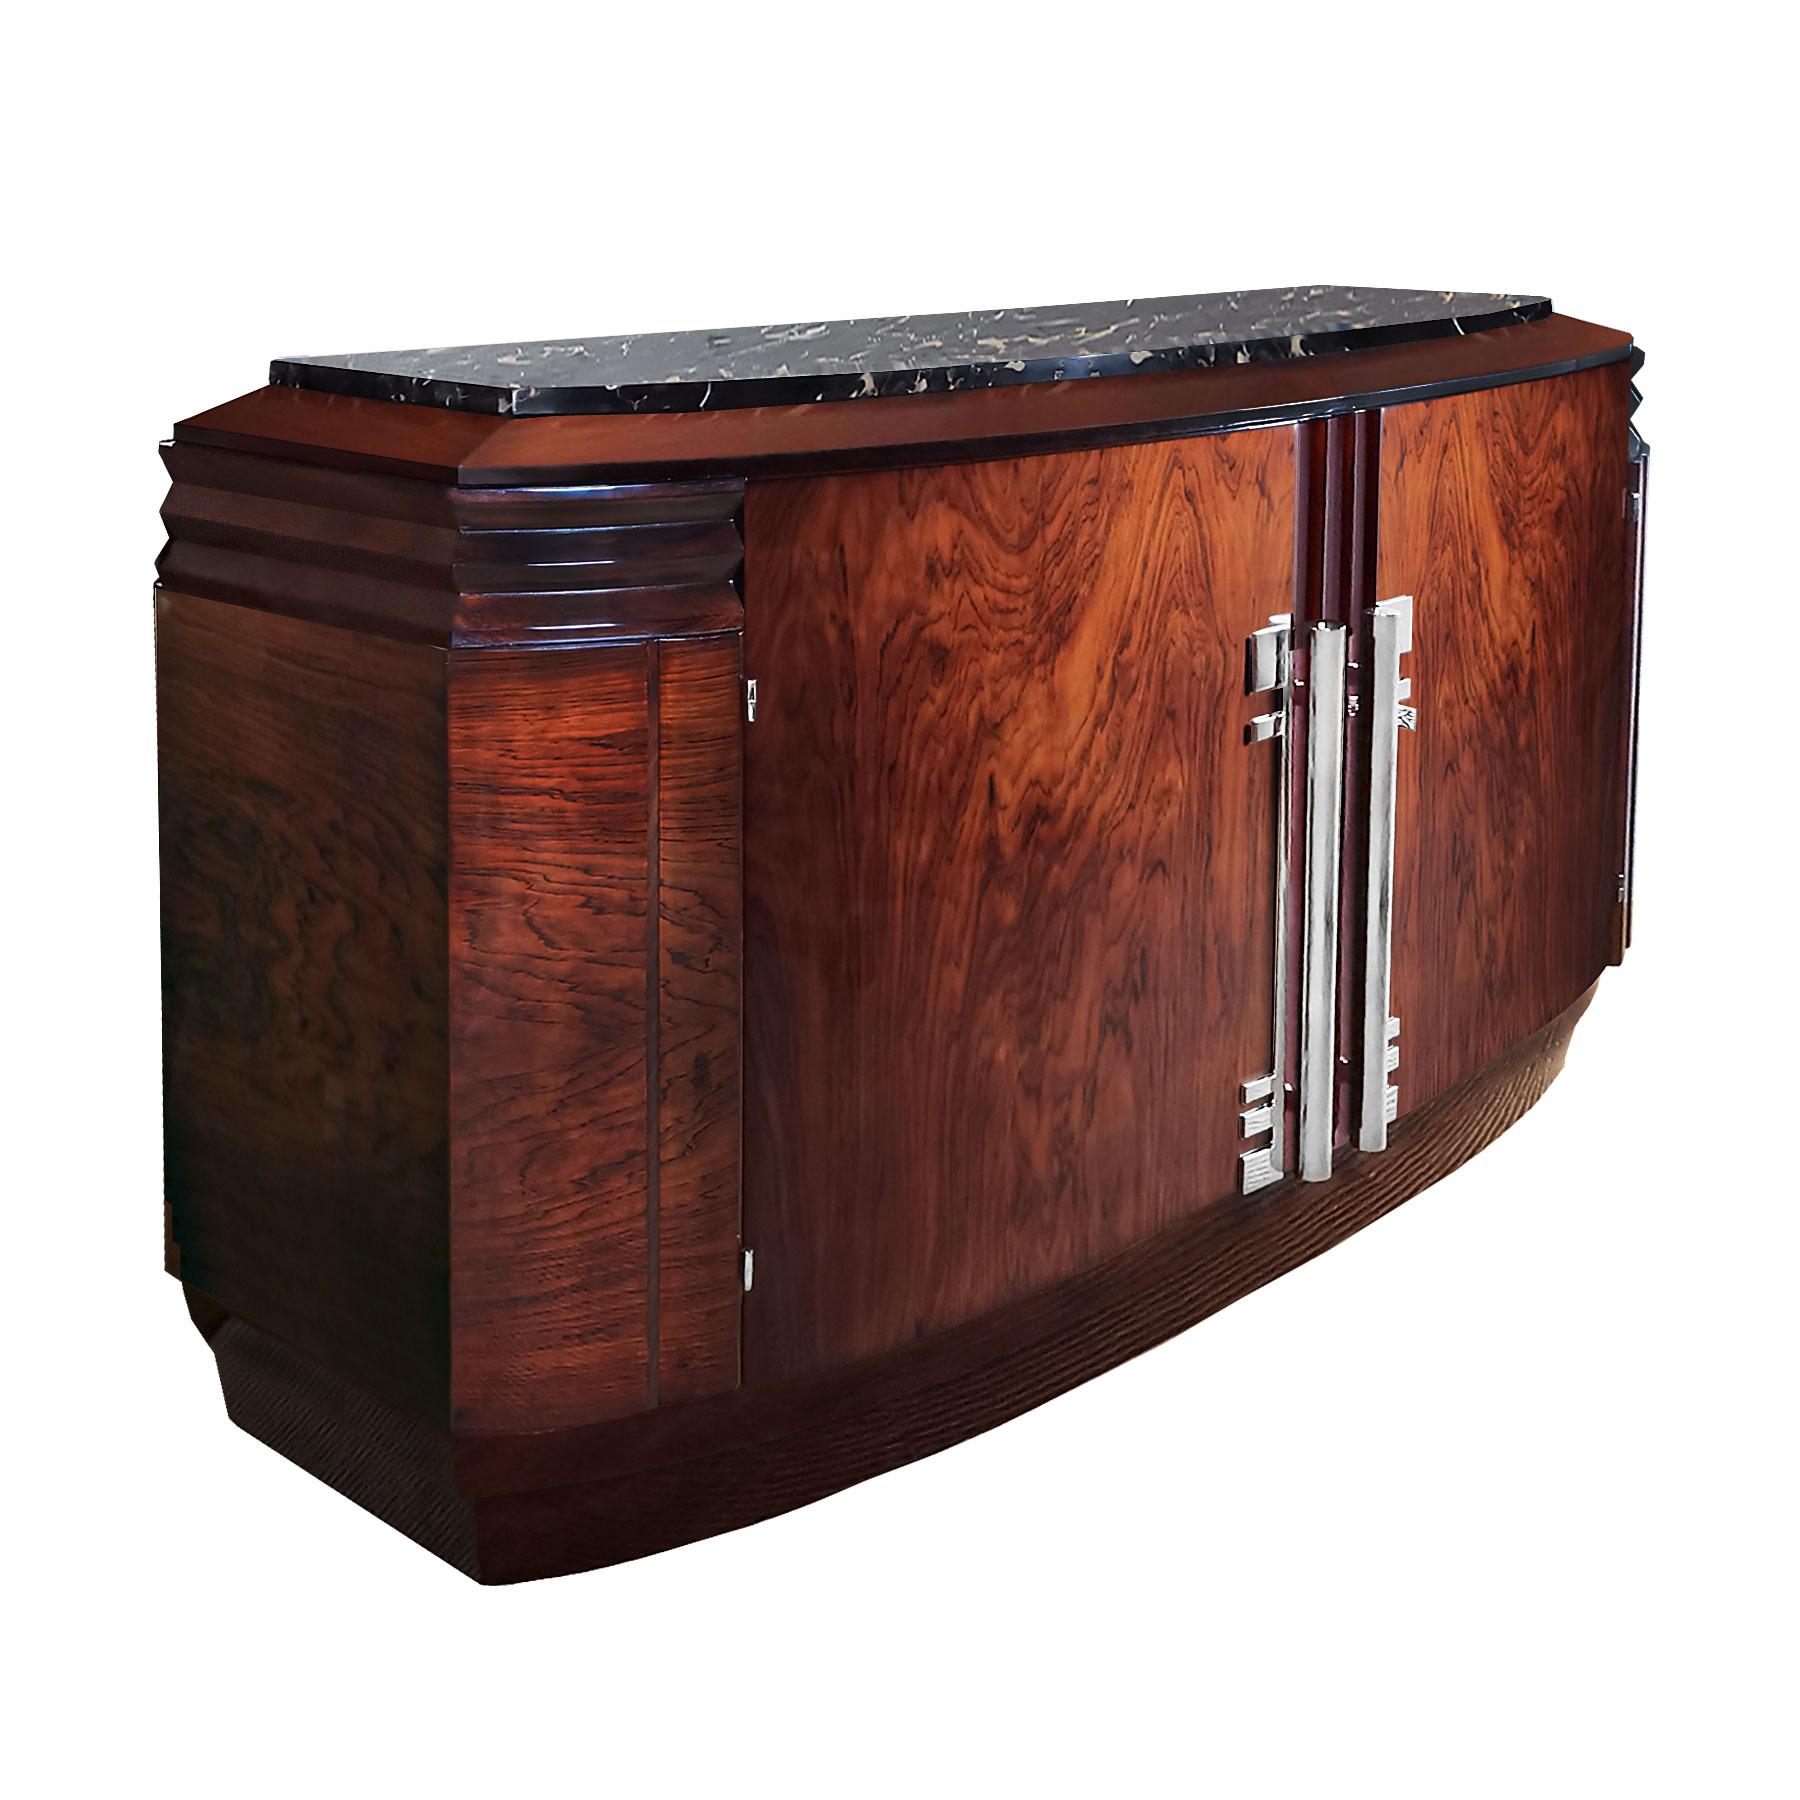 Art Deco sideboard with two doors, solids mahogany and oak structure, mahogany veneer, French polish. Nickel plated solid brass handles and hardware. Portor marble on top. Sycamore and mahogany inside with three drawers and shelf.
The top marble is